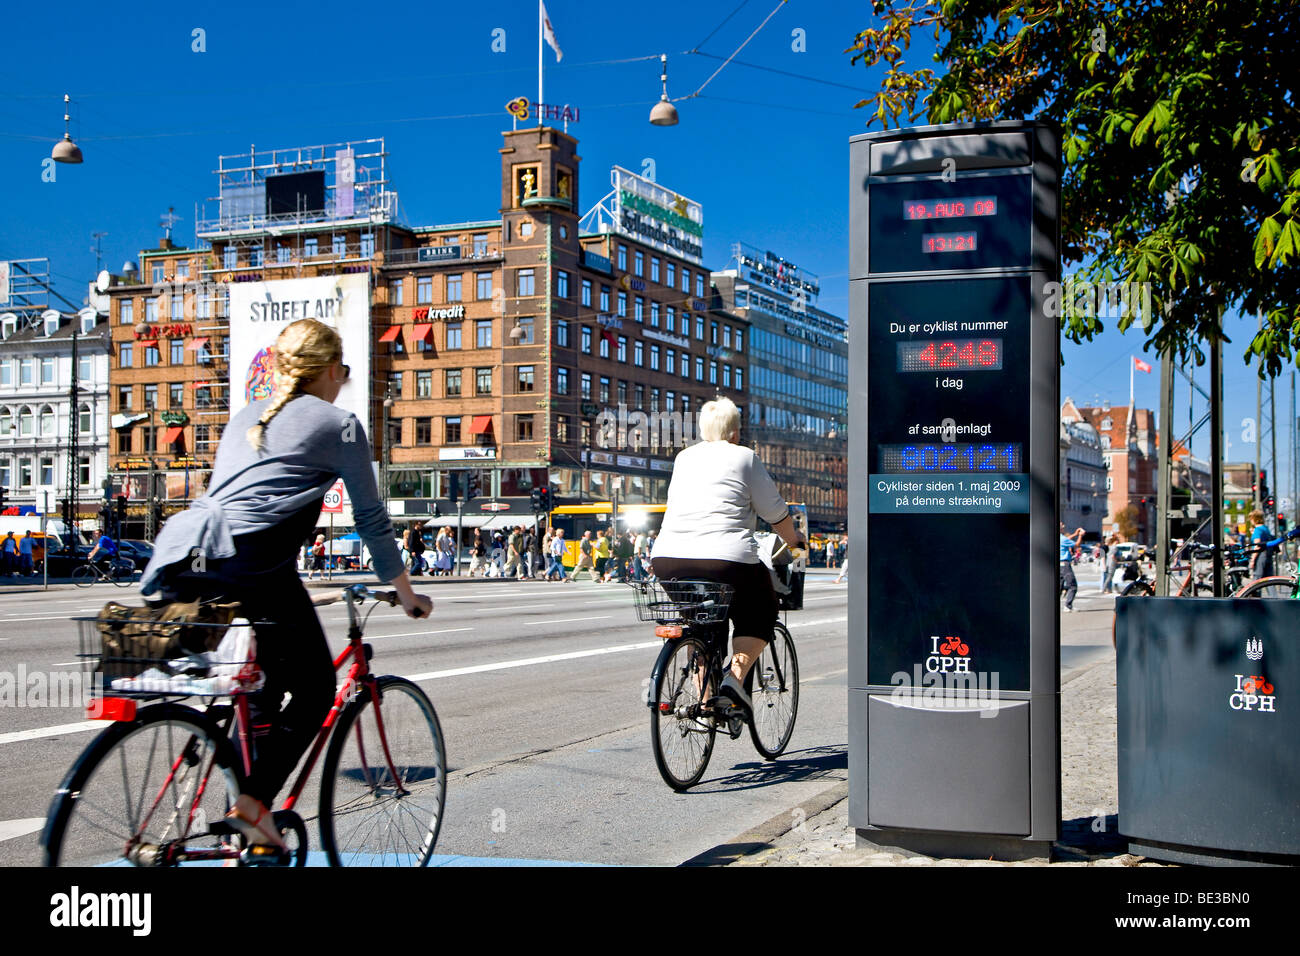 https://c8.alamy.com/comp/BE3BN0/electronic-bicycle-counter-at-the-city-hall-square-in-copenhagen-denmark-BE3BN0.jpg